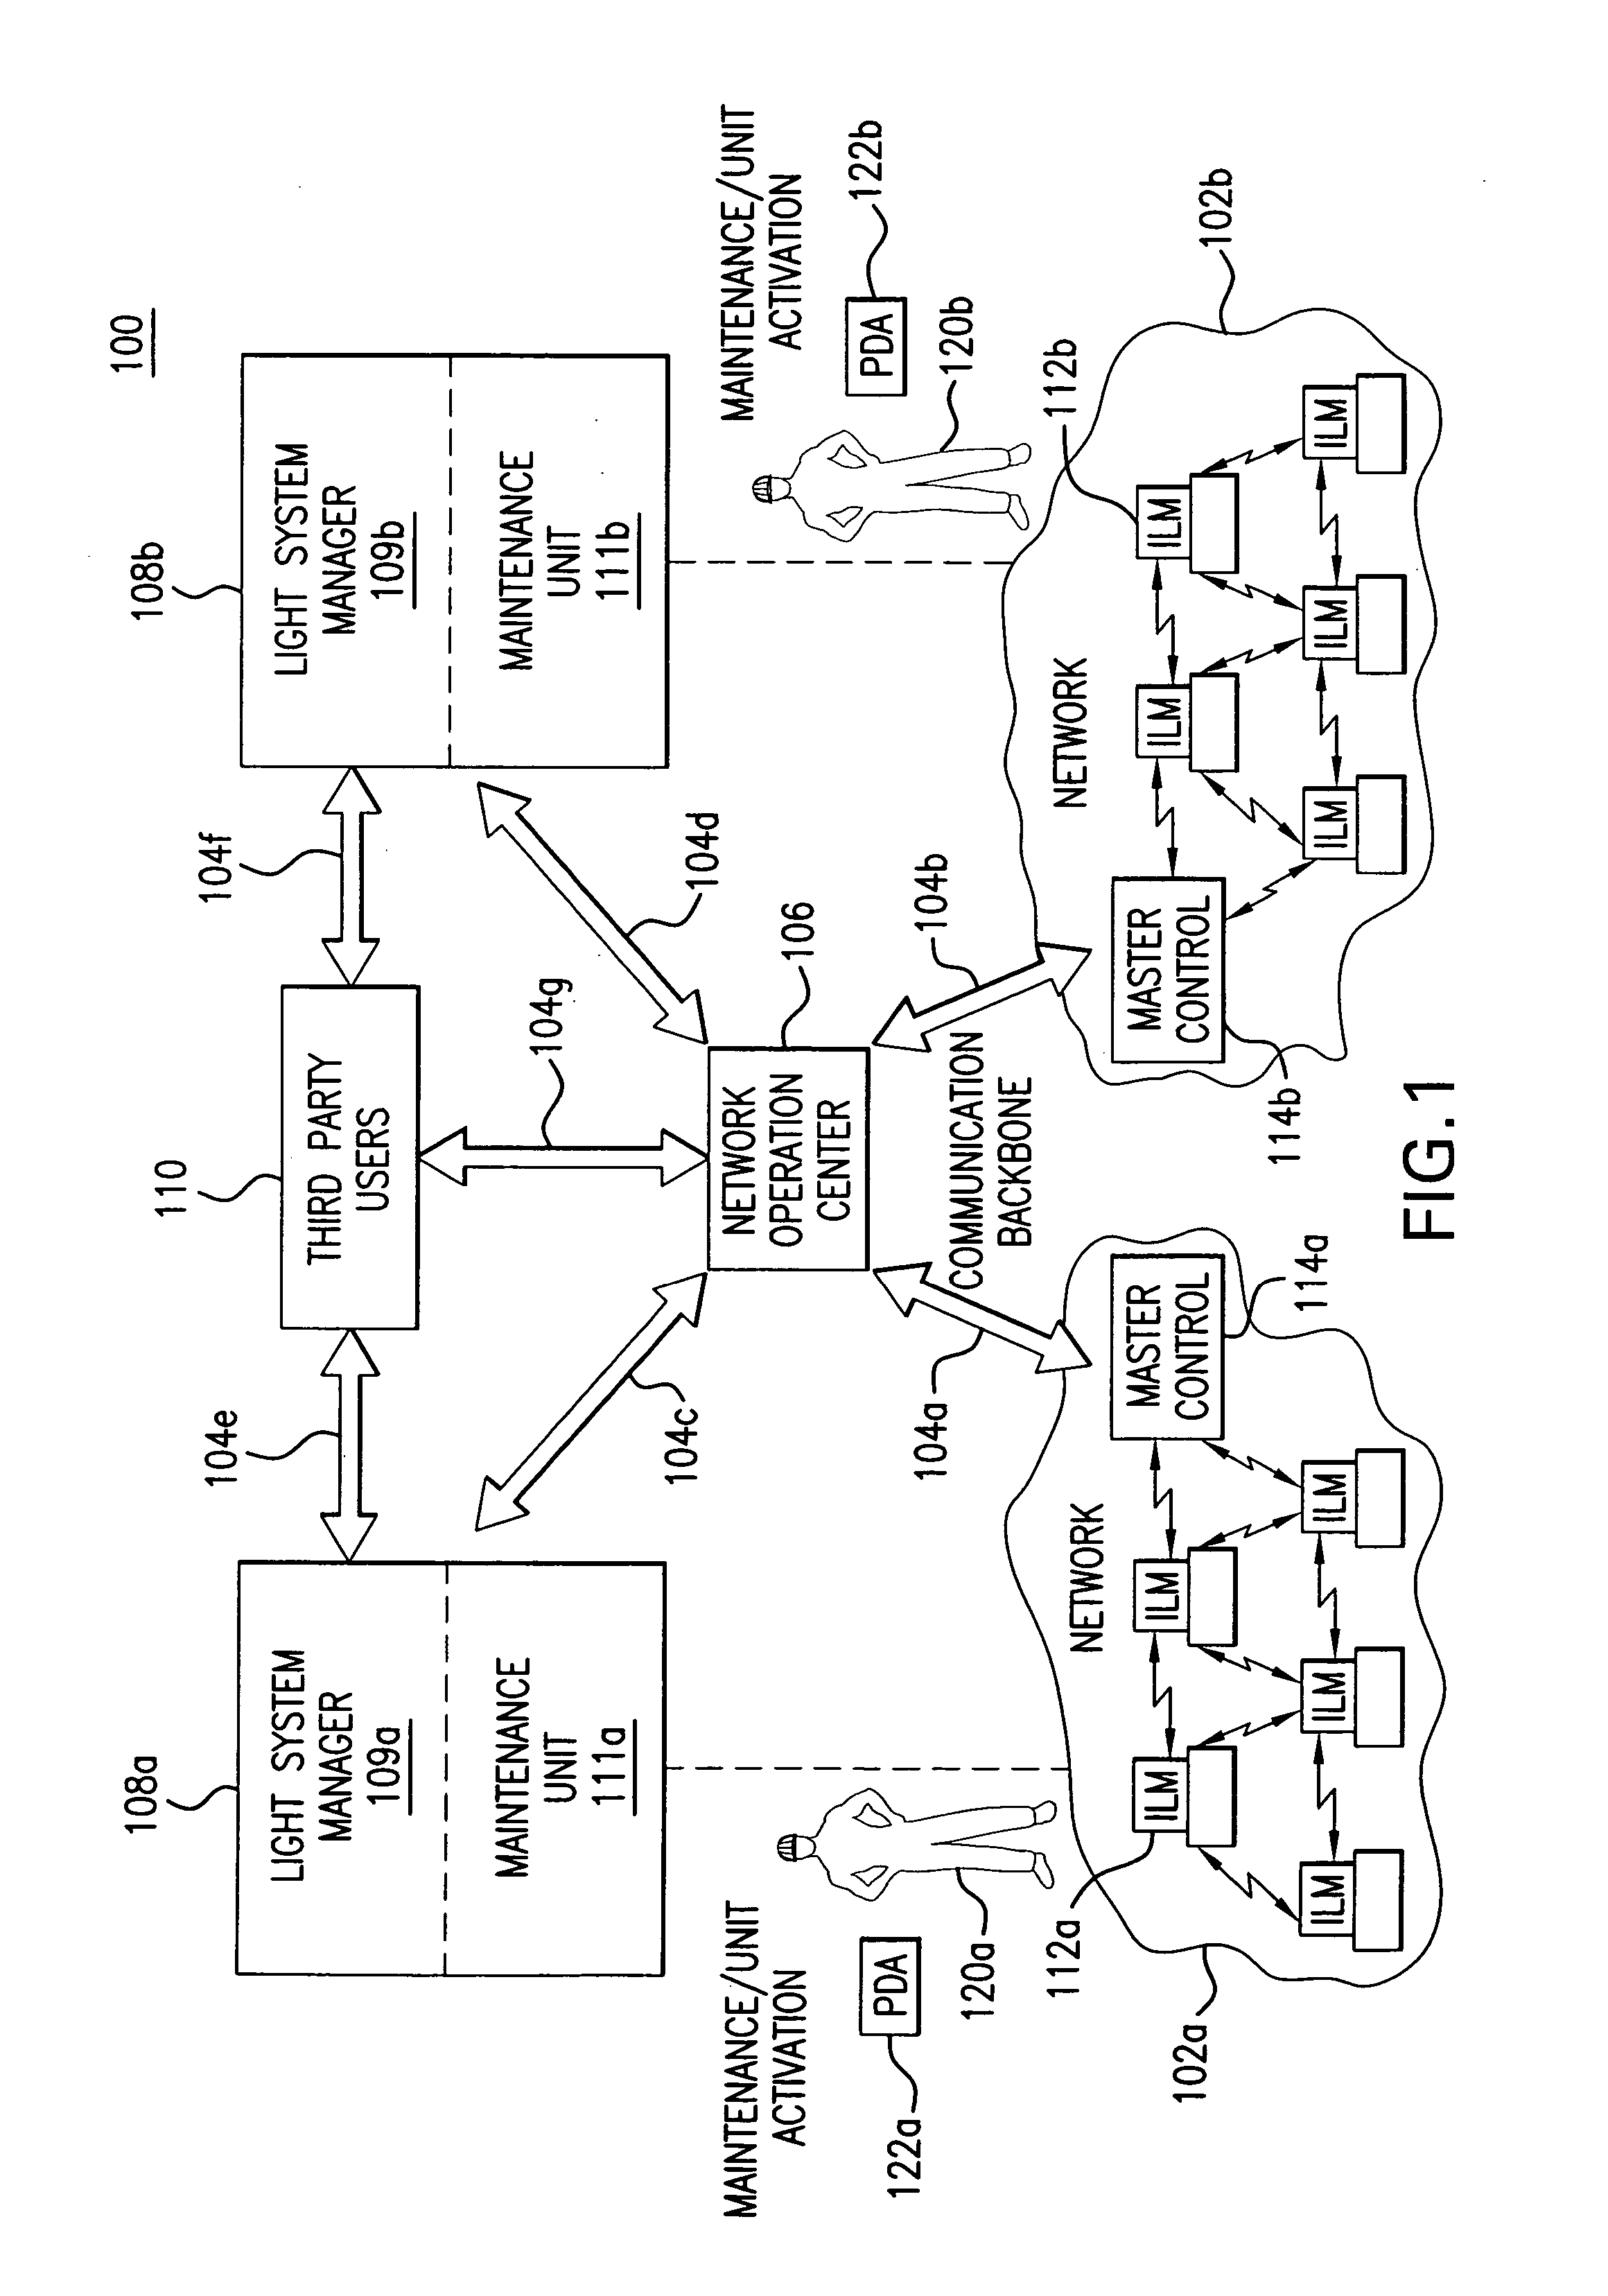 Light management system having networked intelligent luminaire managers